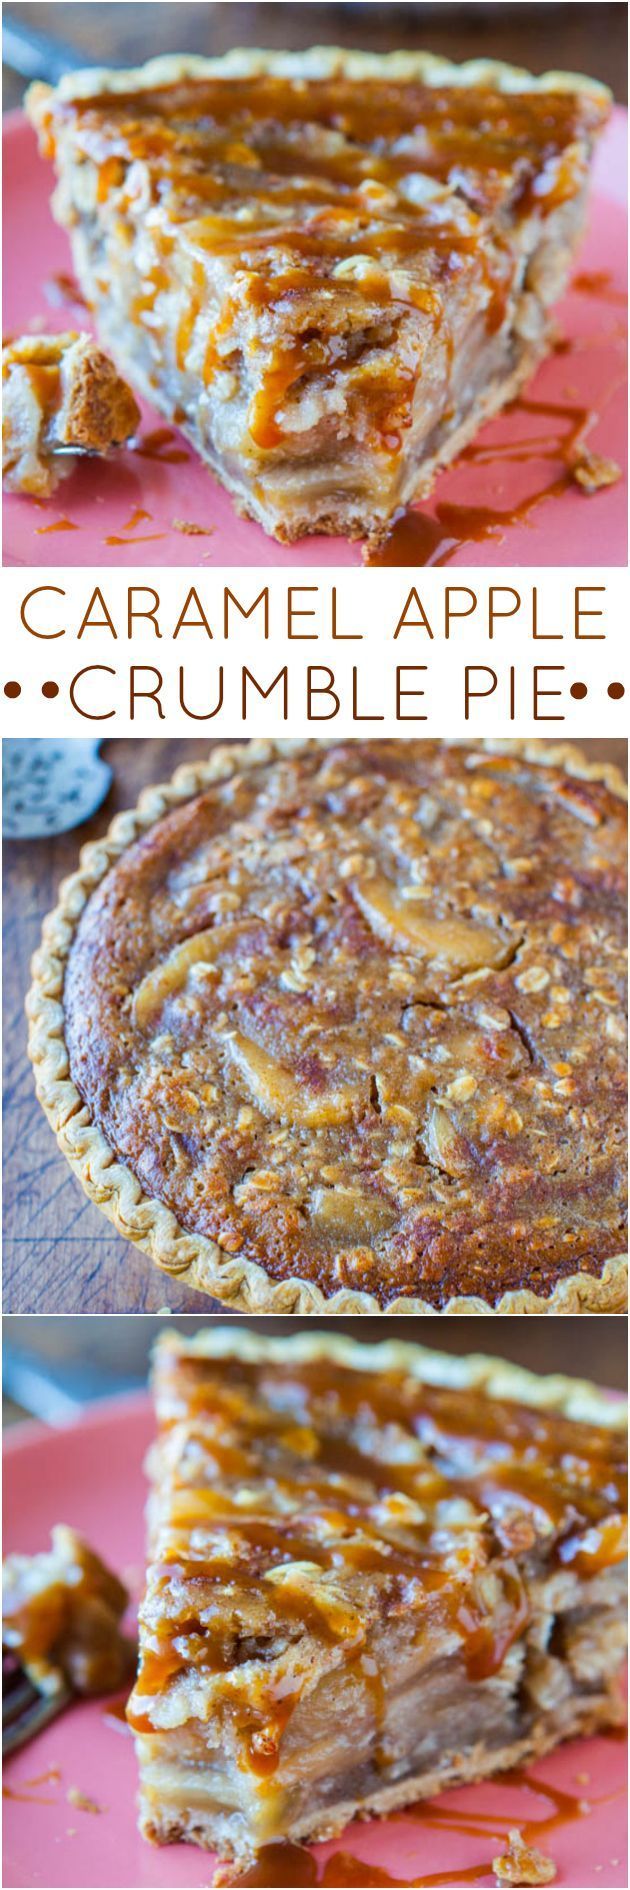 Caramel Apple Crumble Pie – Apple pie meets apple crumble with loads of caramel! The easiest apple pie you’ll ever make. Goofproof